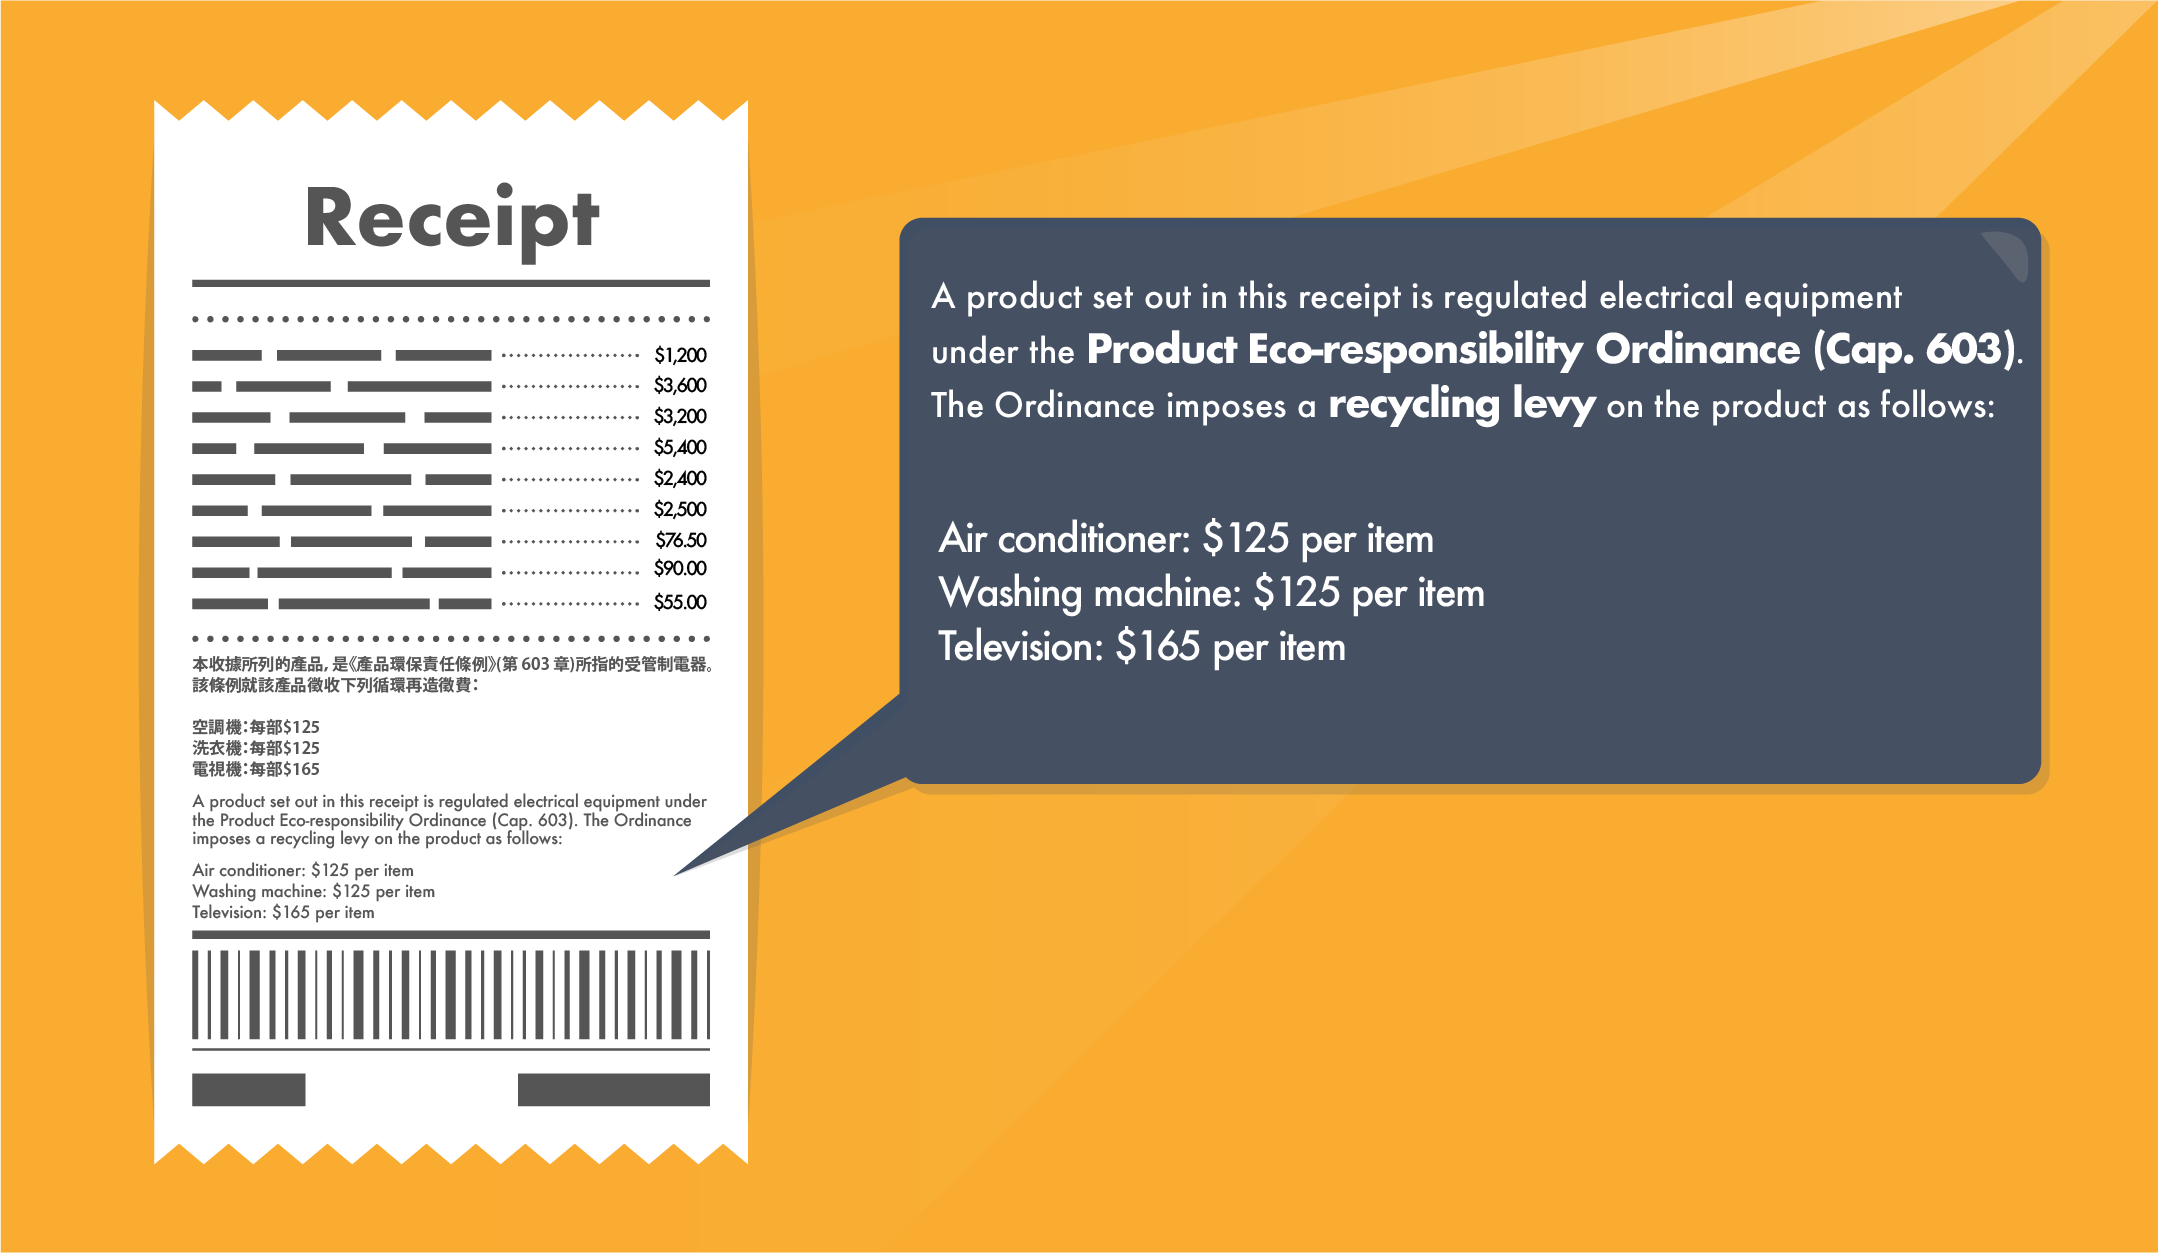 With reference to a hypothetical transaction involving the distribution of an air conditioner, a washing machine and a television, the following wording should appear on the receipt issued to consumers - A product set out in the receipt is regulated electrical equipment under the Product Eco- responsibility Ordinance (Cap.603). This Ordinance imposes a recycling levy on the product as follows: Air-conditioner : $125 per item Washing machine : $125 per item Television: $165 per item